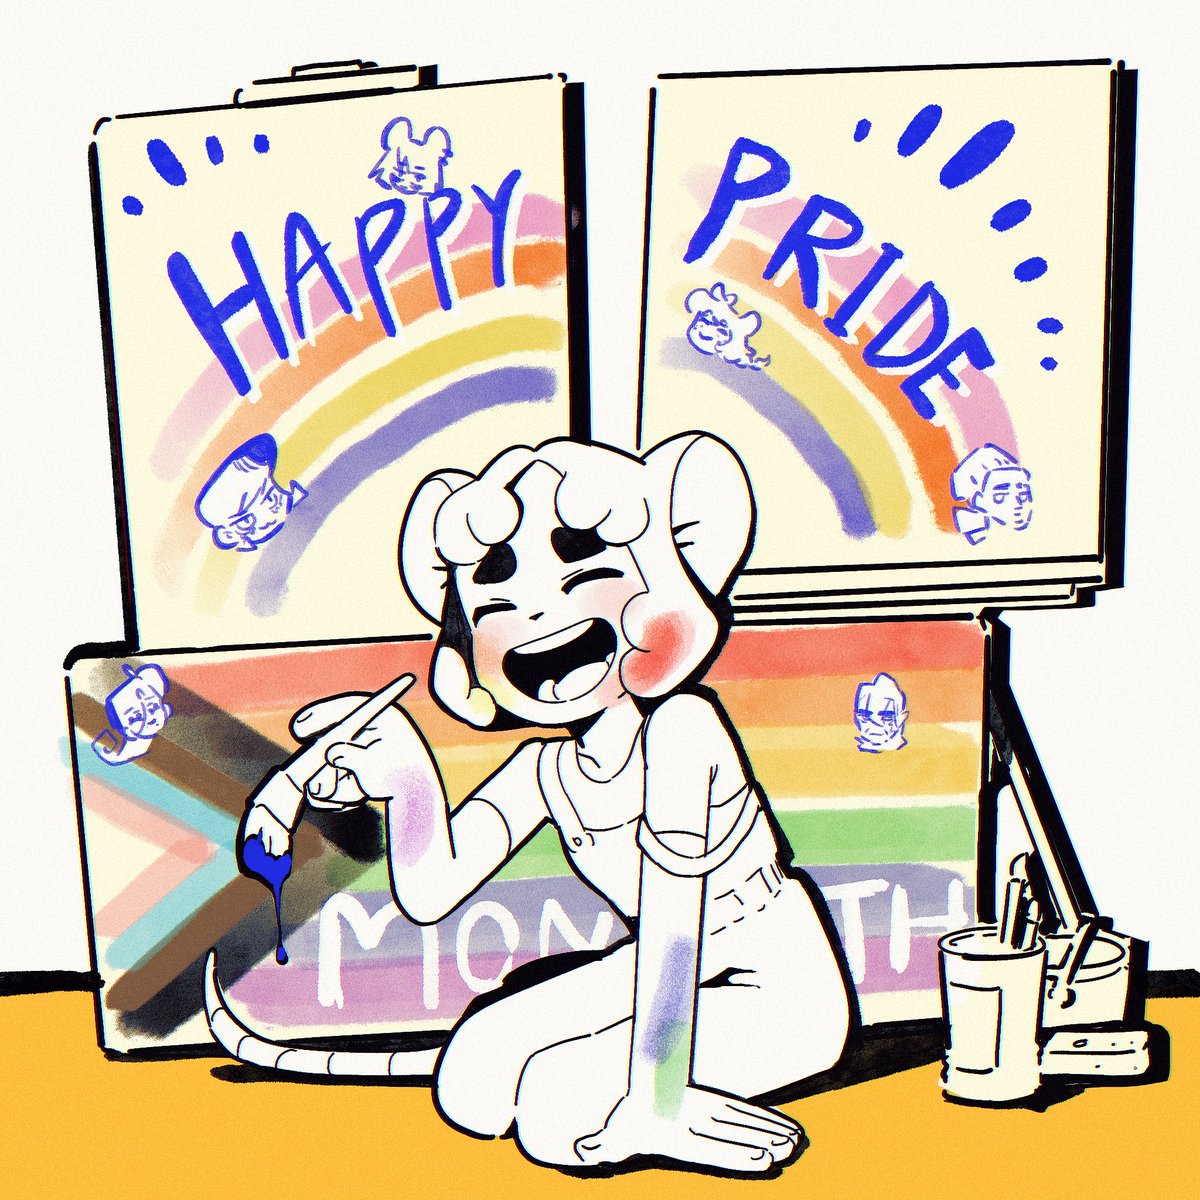 #MusicalPipers
#뮤지컬파이퍼즈 
#HappyPrideMonth 

❤️🧡💛💚💙💜🤎🖤
✨Last day of Pride Month✨
❤️🧡💛💚💙💜🤎🖤